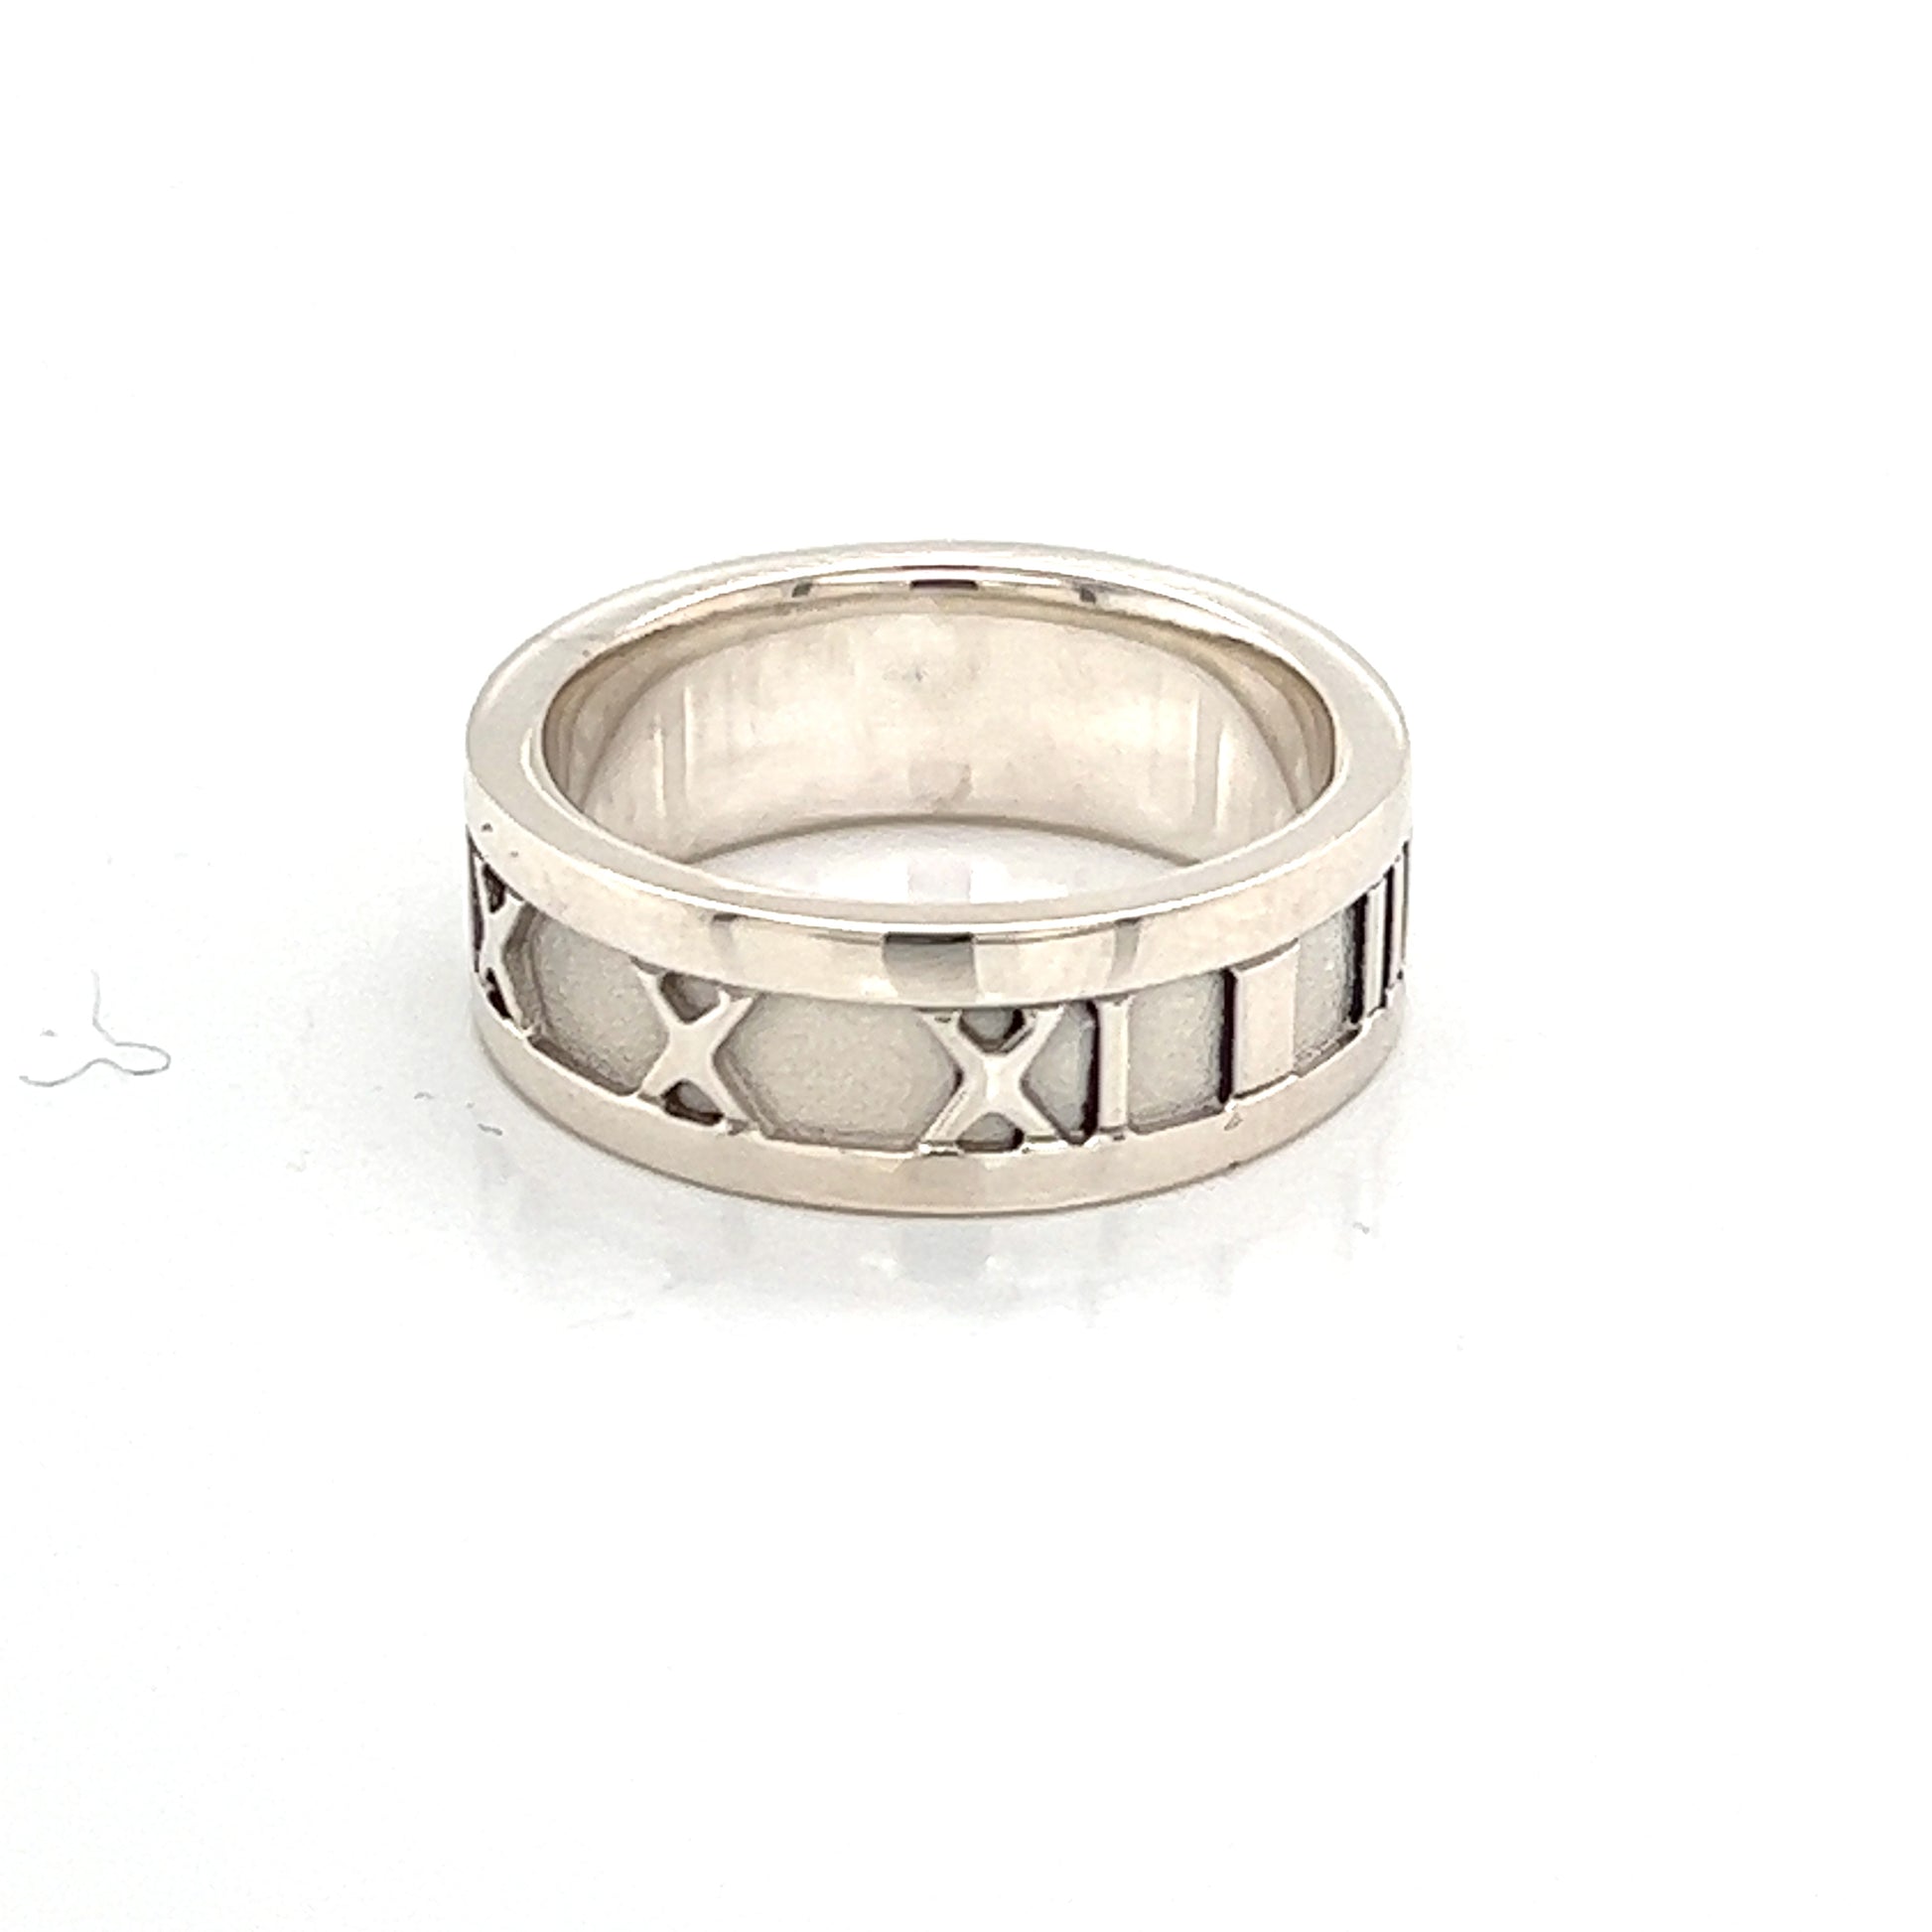 Tiffany & Co Estate Sterling Silver Ring Size 4.25, 5.2 Grams TIF182 - Certified Estate Jewelry